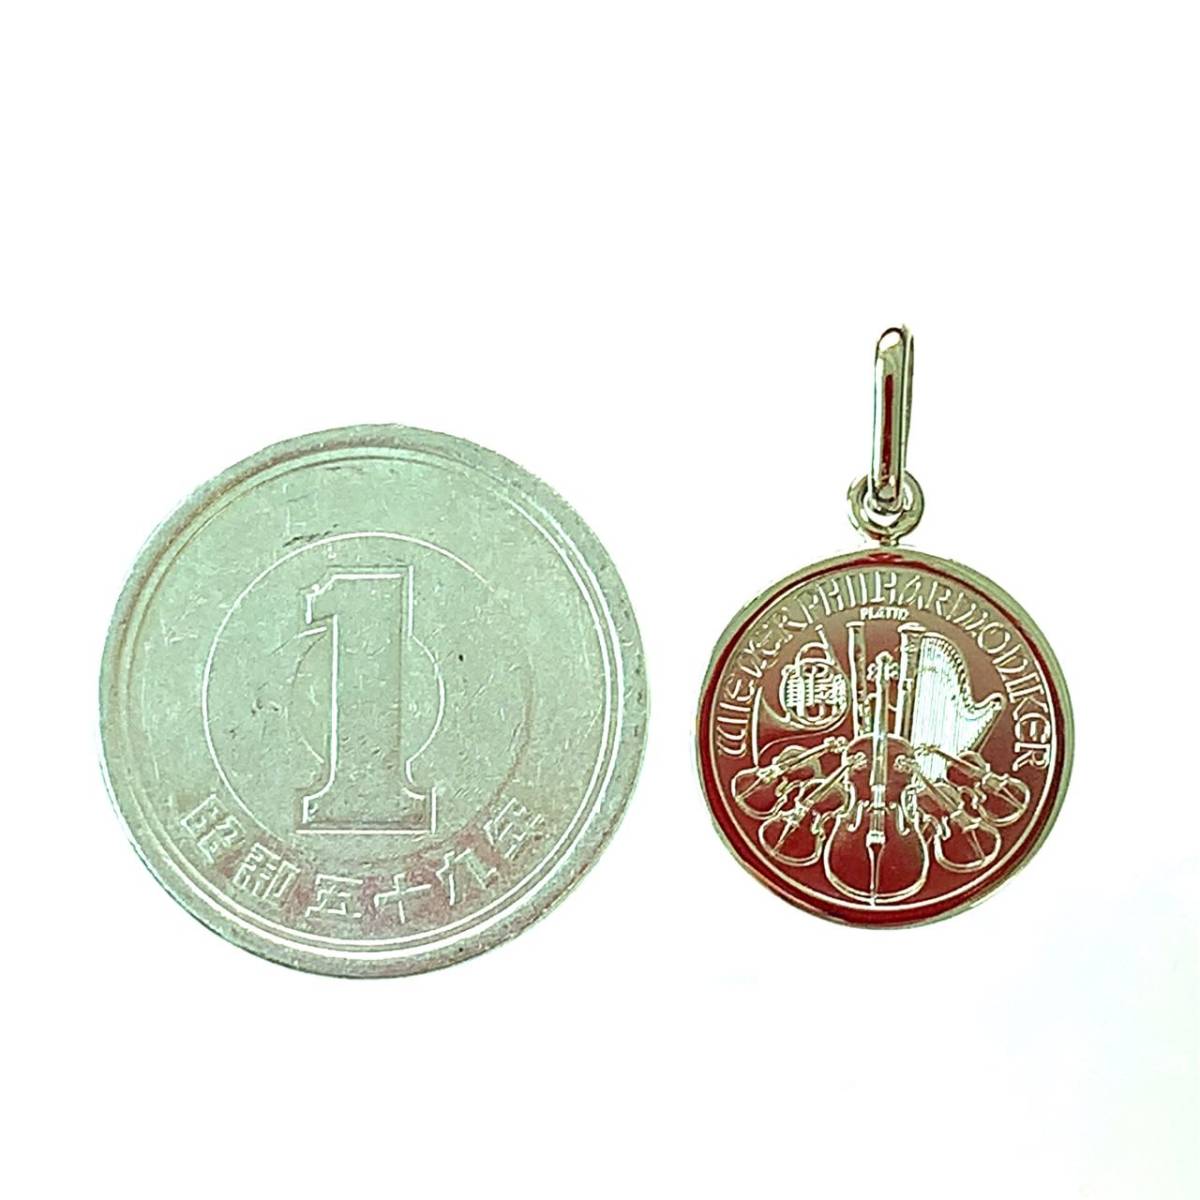  beautiful goods we n platinum . Austria structure . department issue 2020 year 1/25 ounce 1.71g PT 850/ 999 coin pendant 